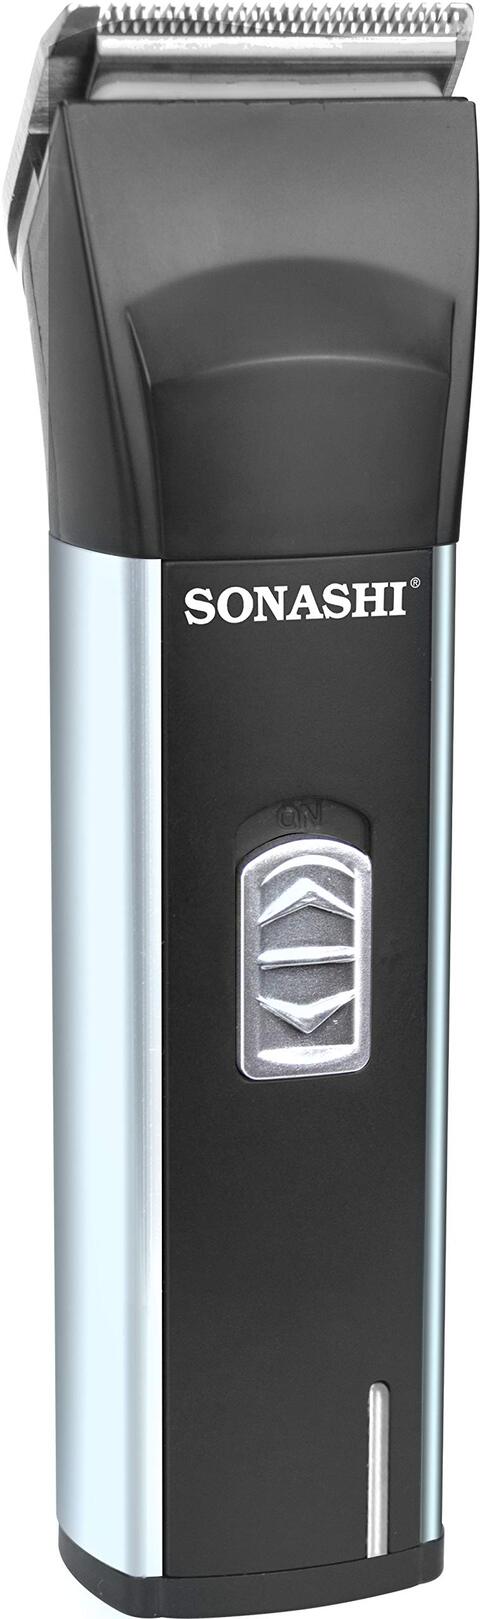 Sonashi SHC-1048 Rechargeable Hair Clipper w/ Fine Blade, High Speed Motor, Plastic Comb, Continuous Working, Portable, Cordless   Cordless Hair Clipper   Home Appliance